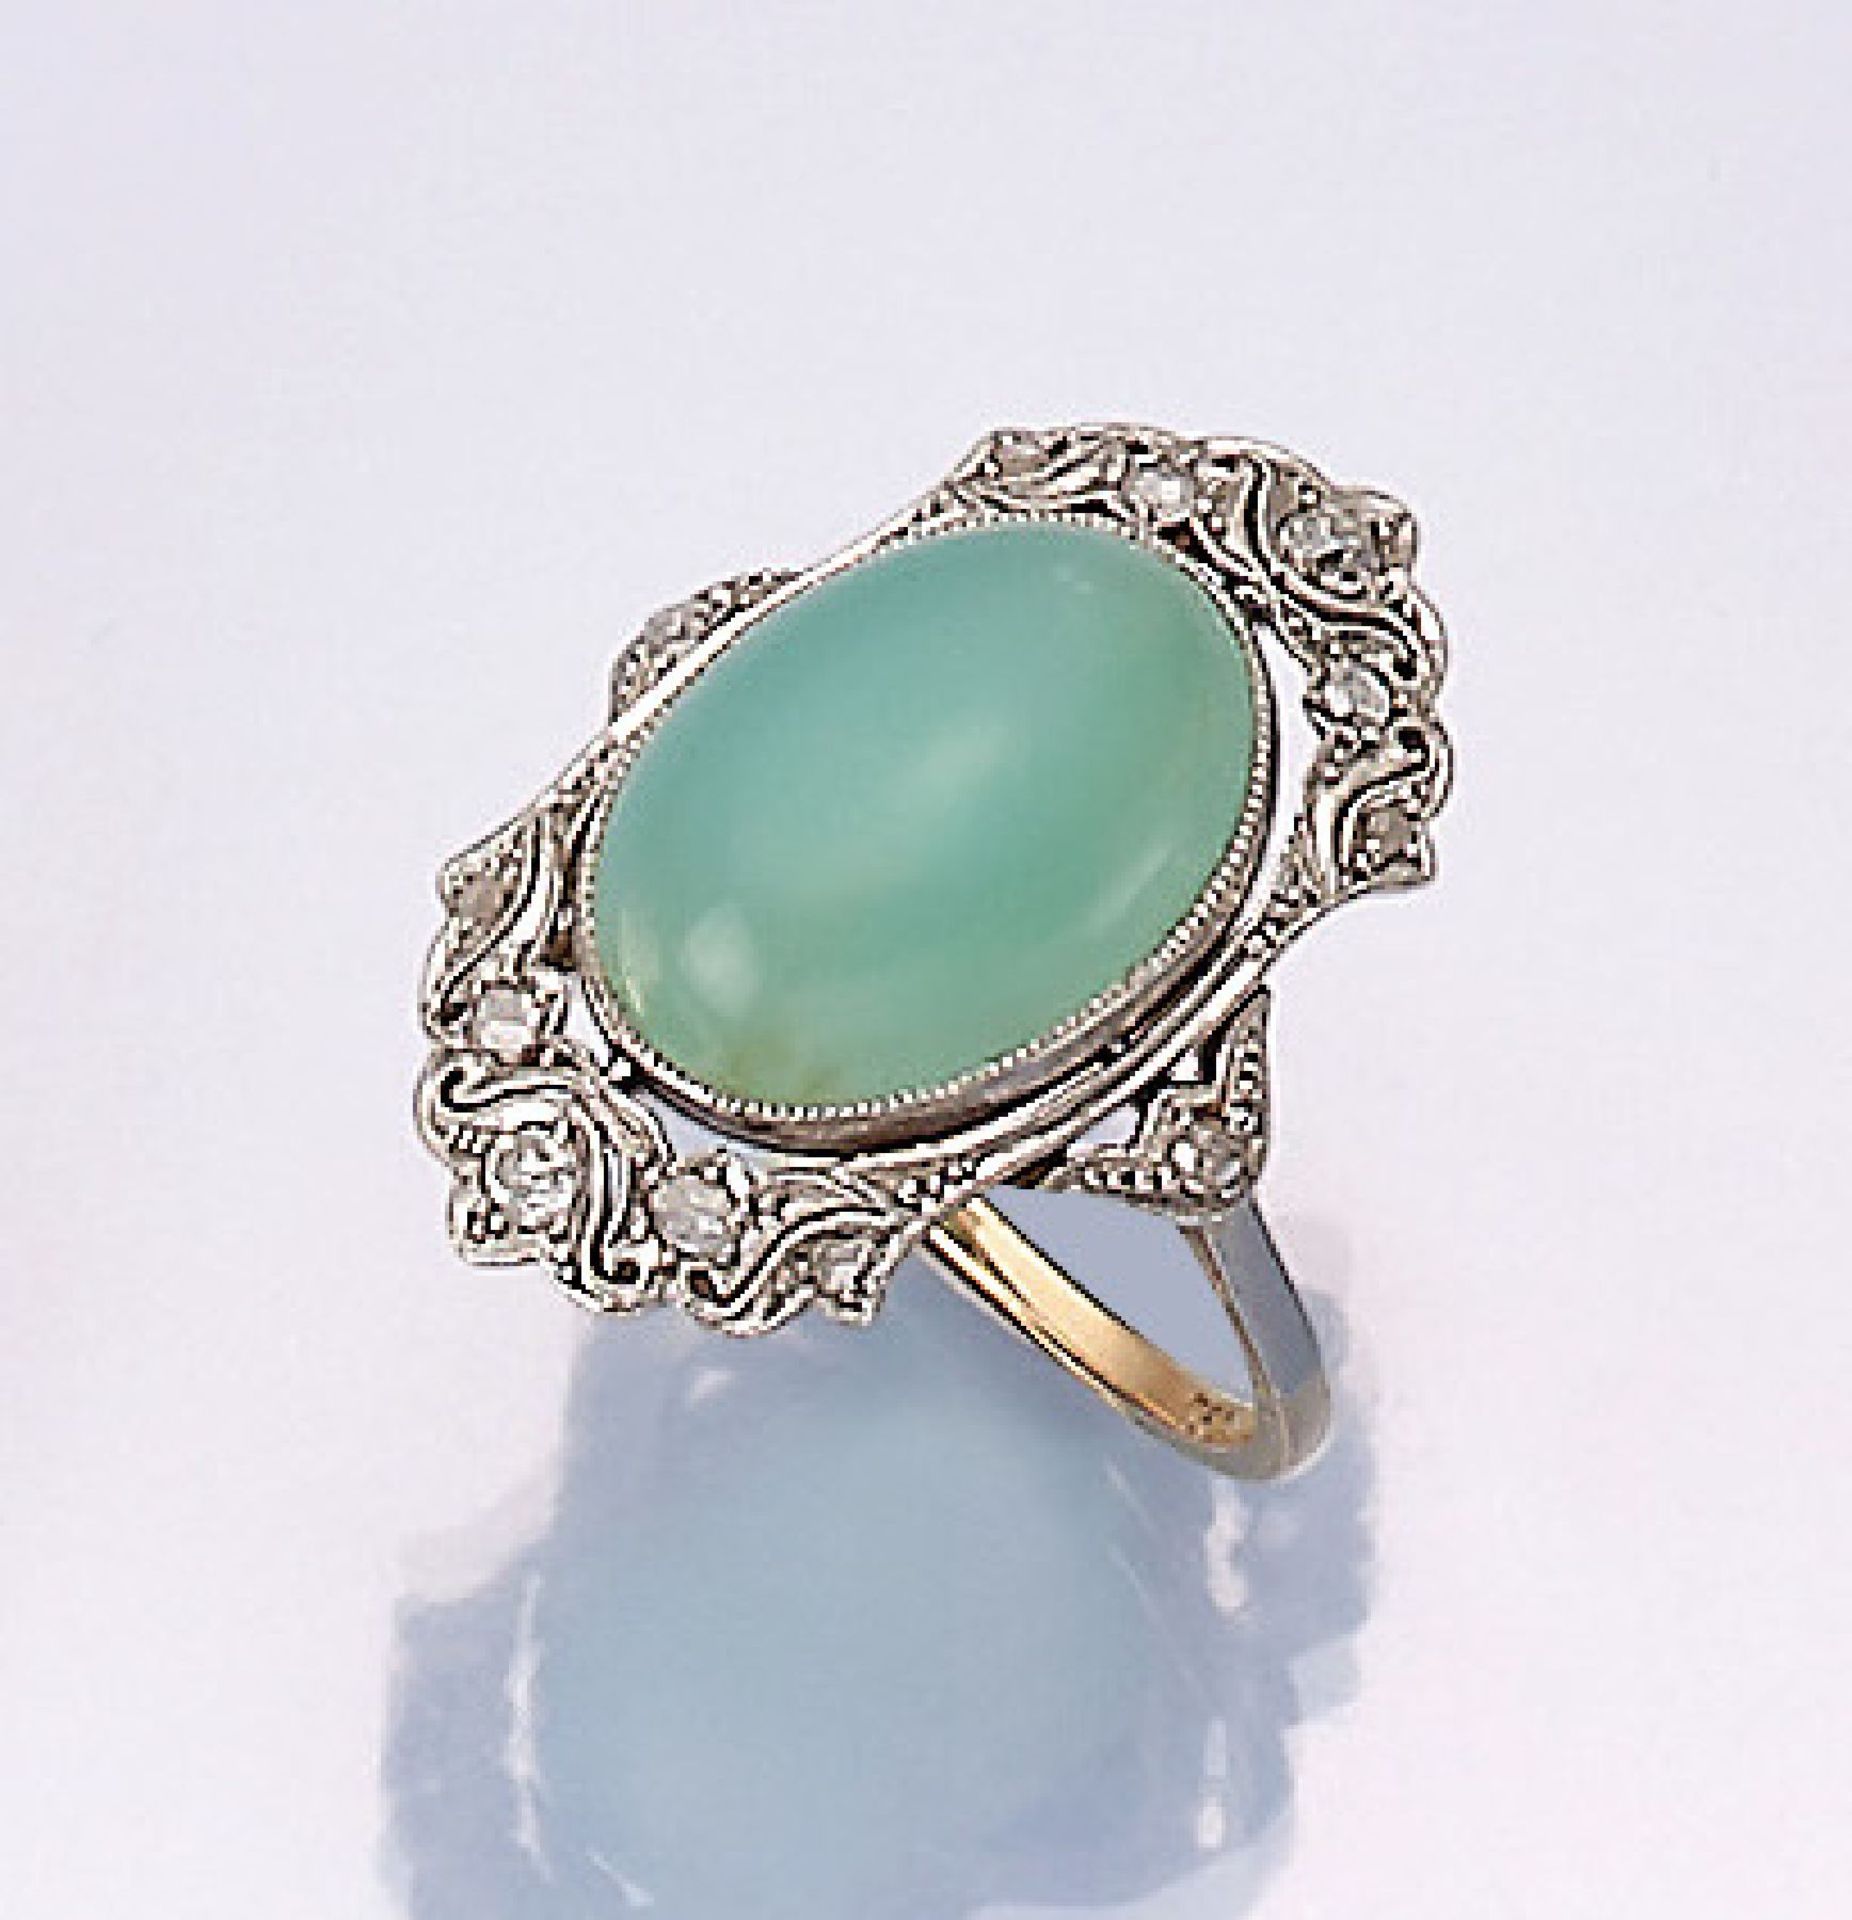 18 kt gold ring with chrysoprase and diamonds , YG/WG 750/000, tested, approx. 1930s, chrysoprase